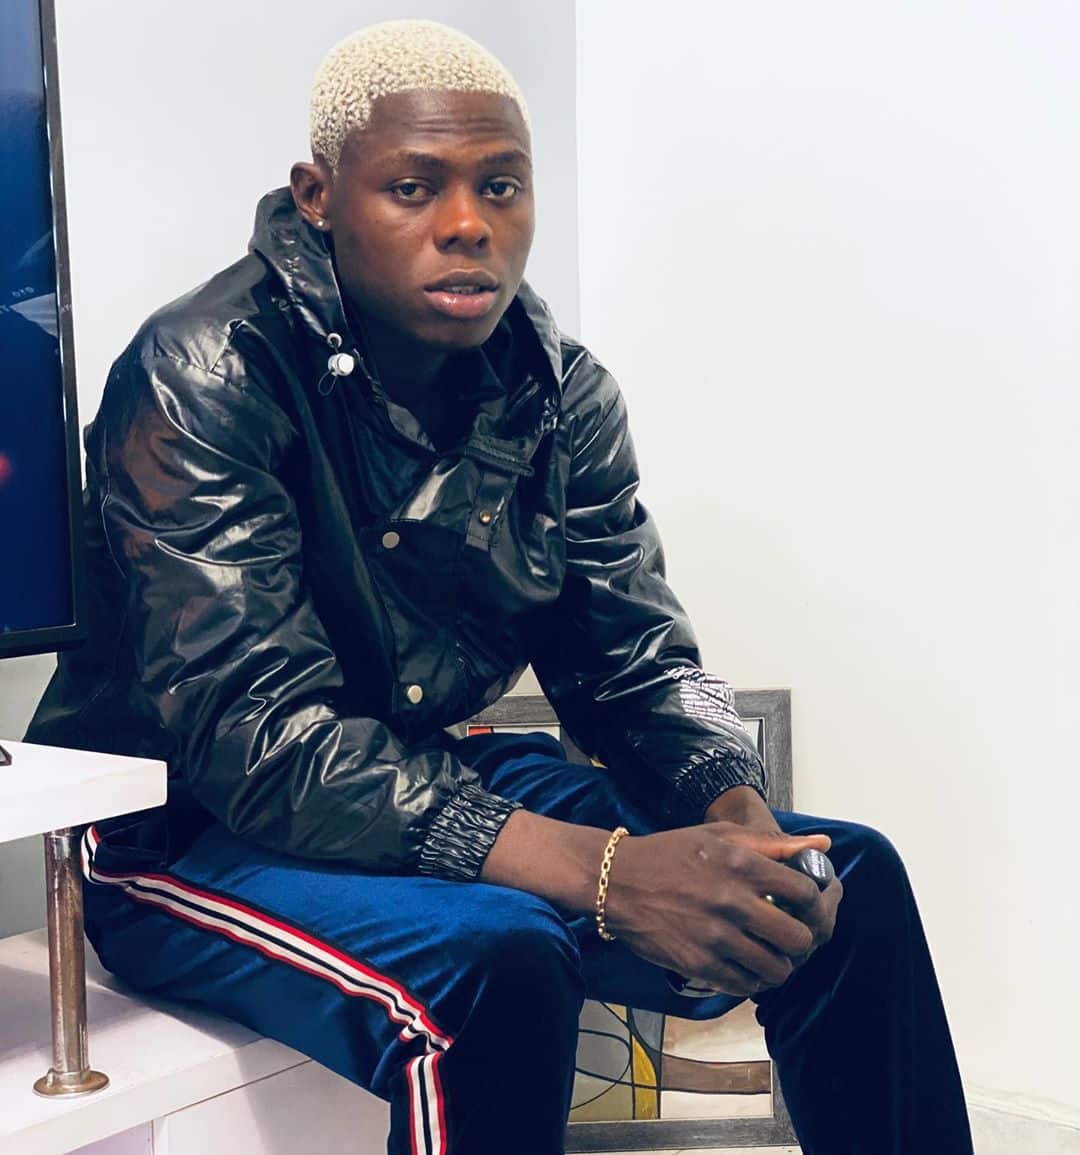 "Mohbad wasn't publicly supported when Naira Marley assaulted him" - Daniel Regha slams artists mourning him